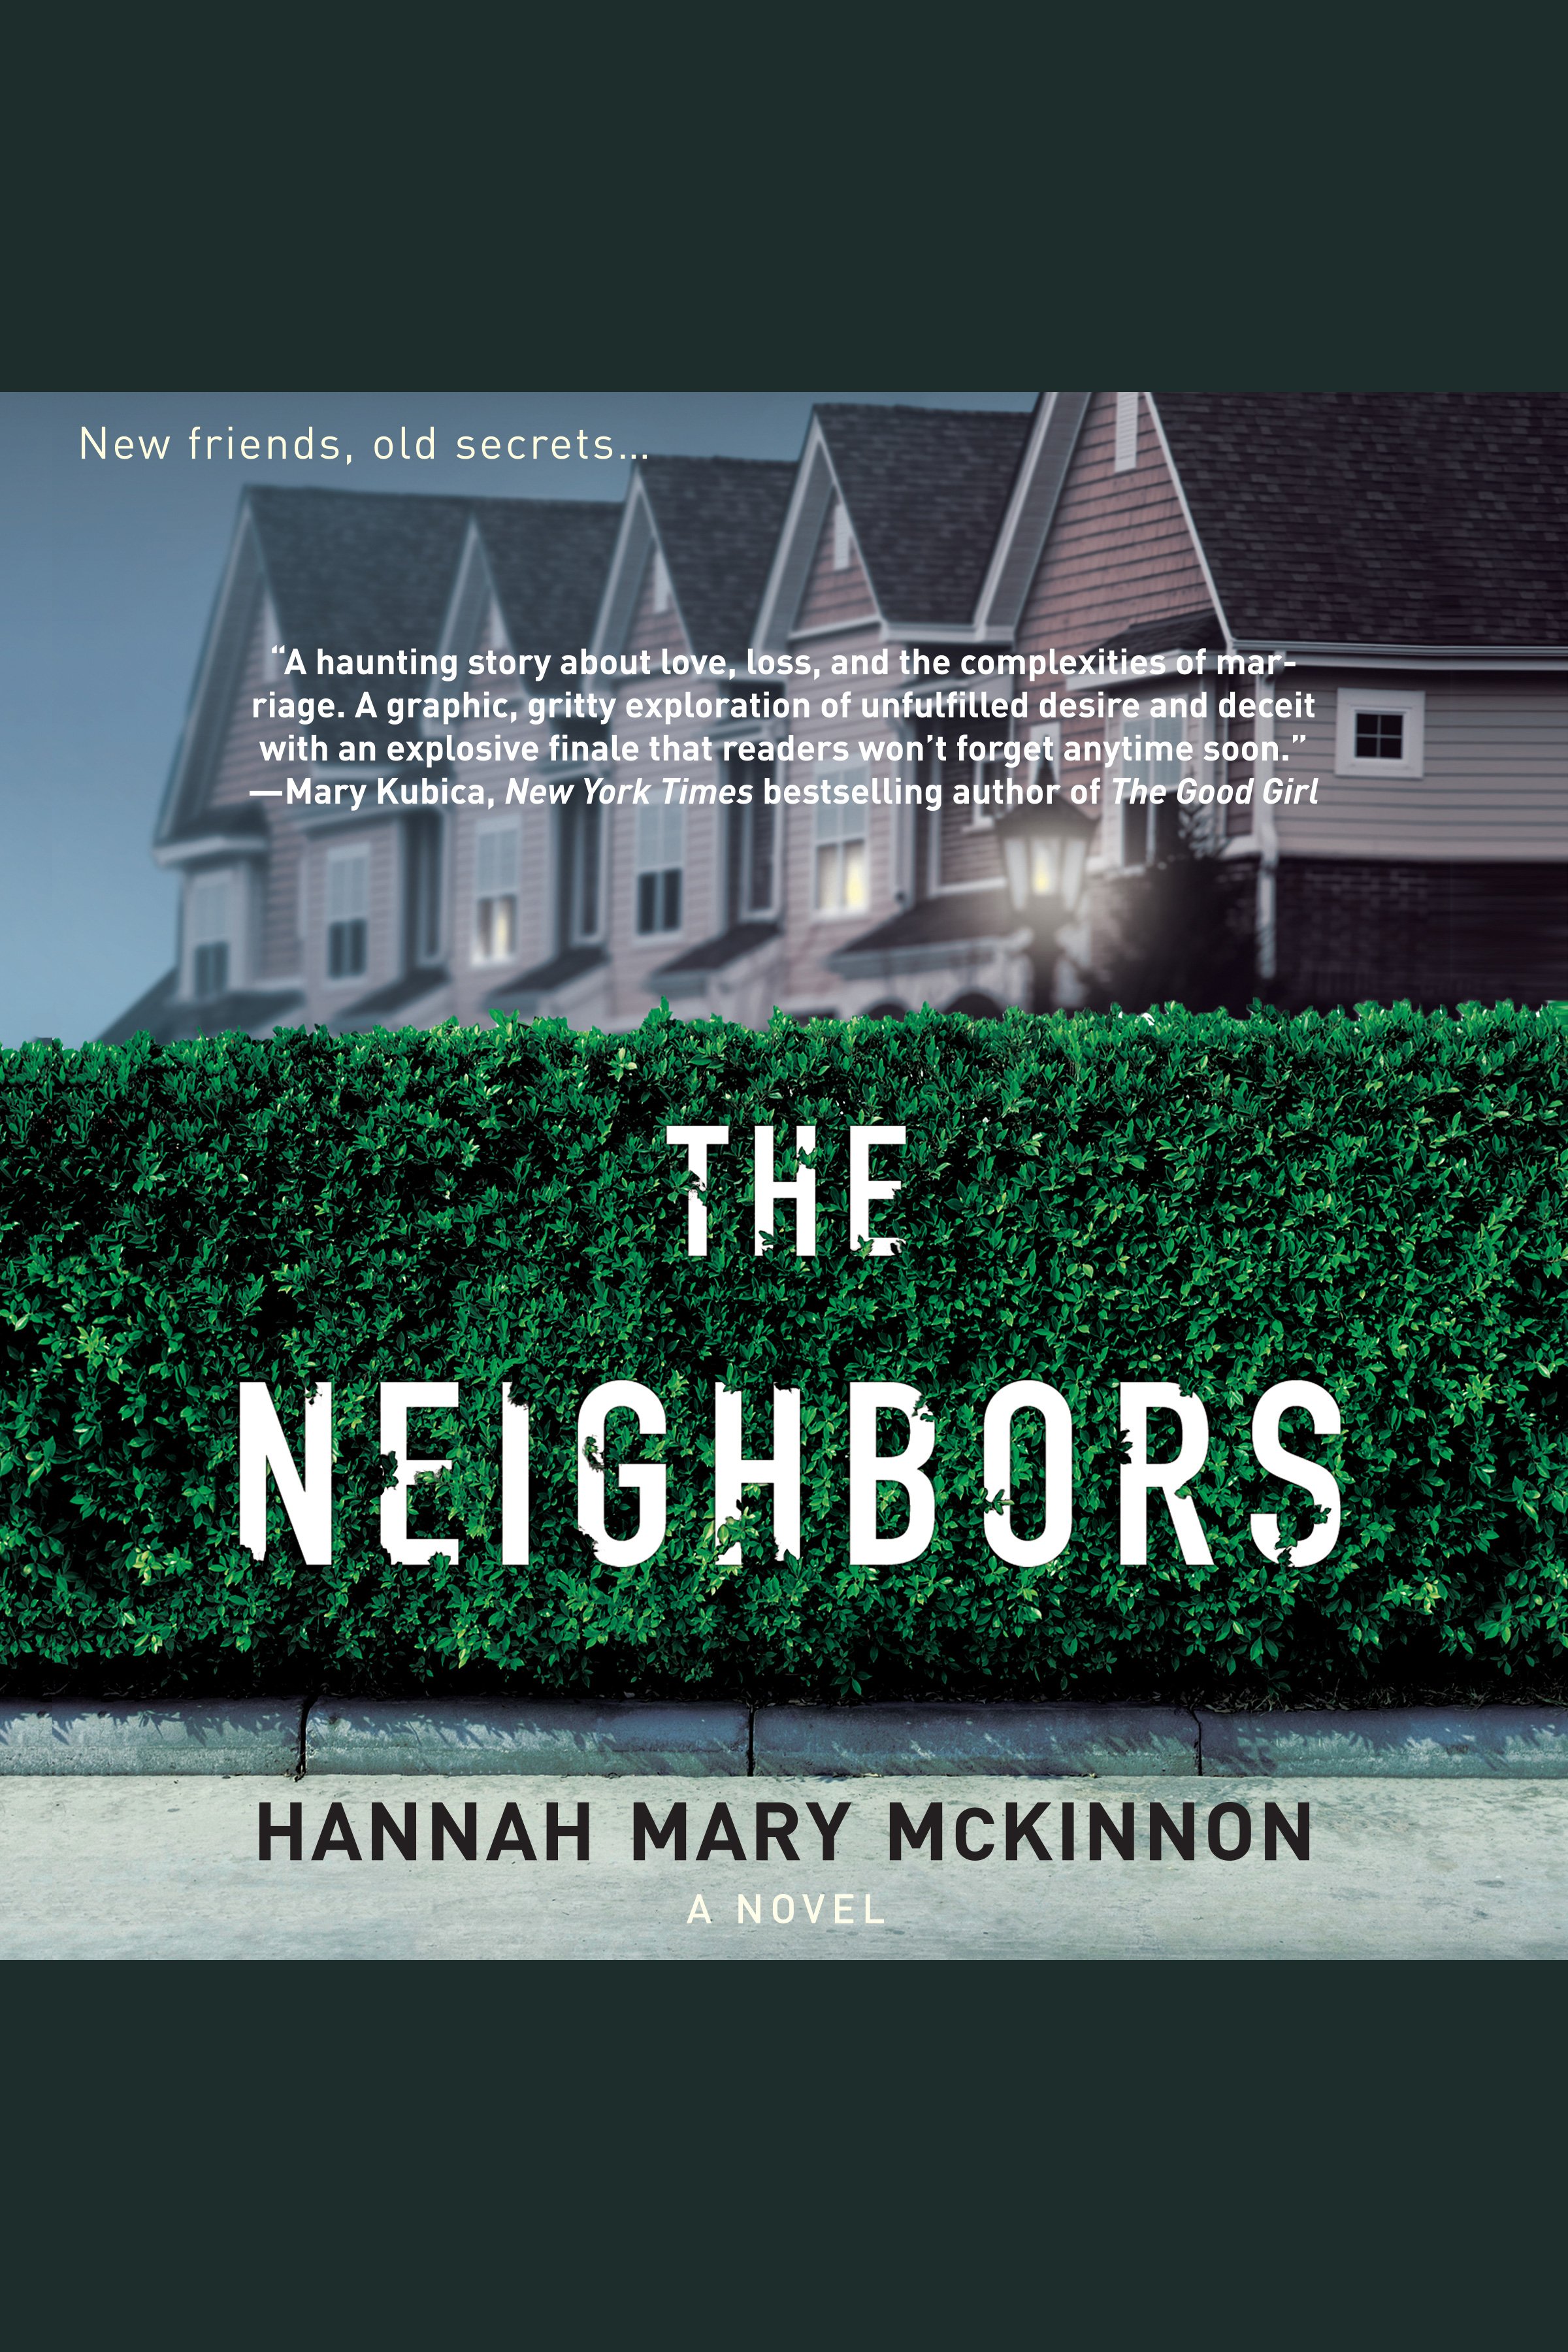 The Neighbors cover image